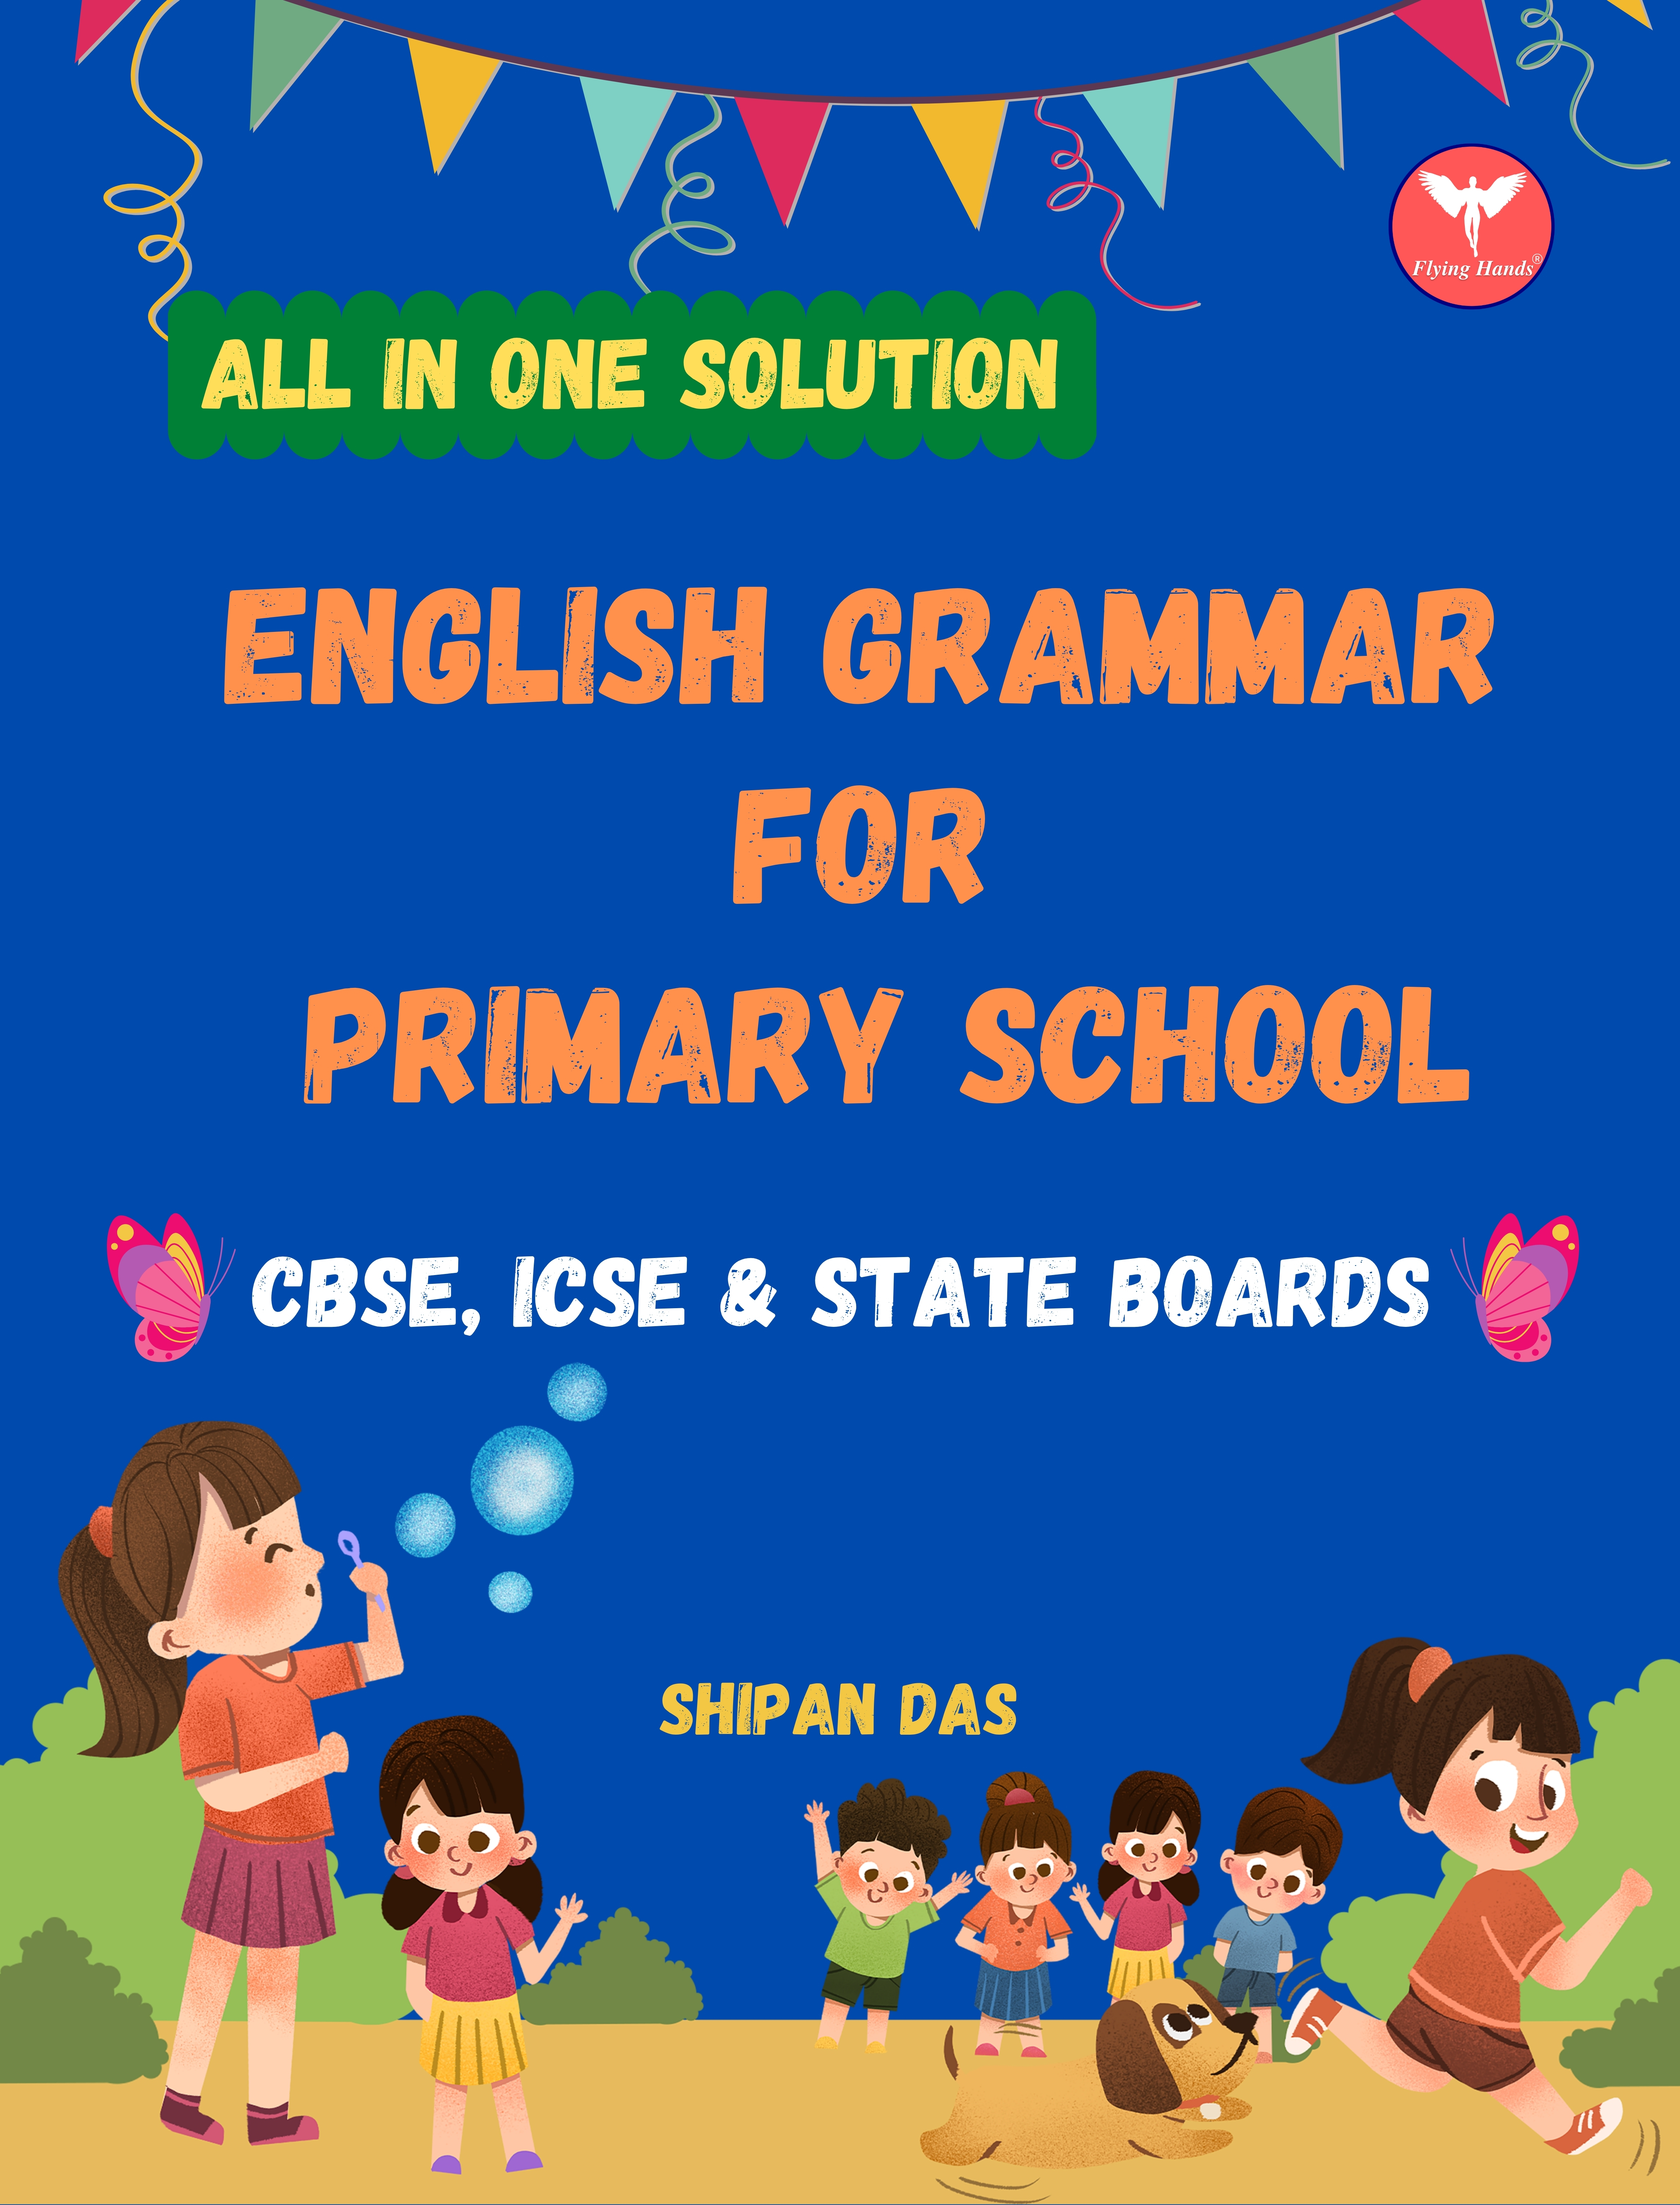 English Grammar for Primary School (CBSE, ICSE & State Boards)